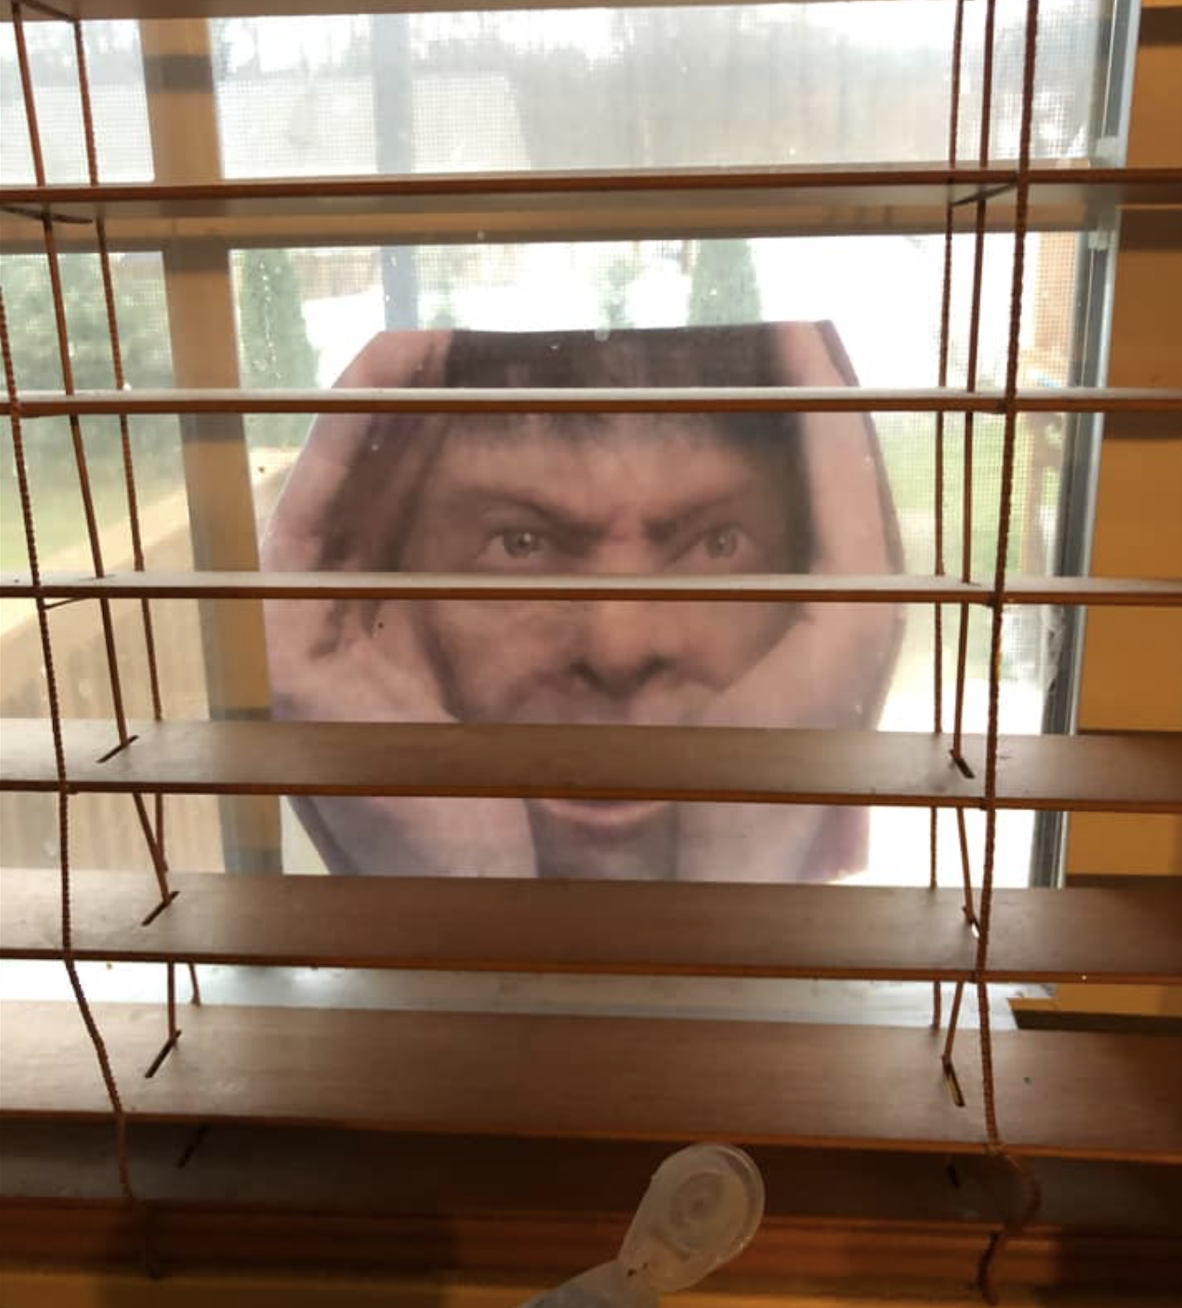 Face in window April Fools Day prank